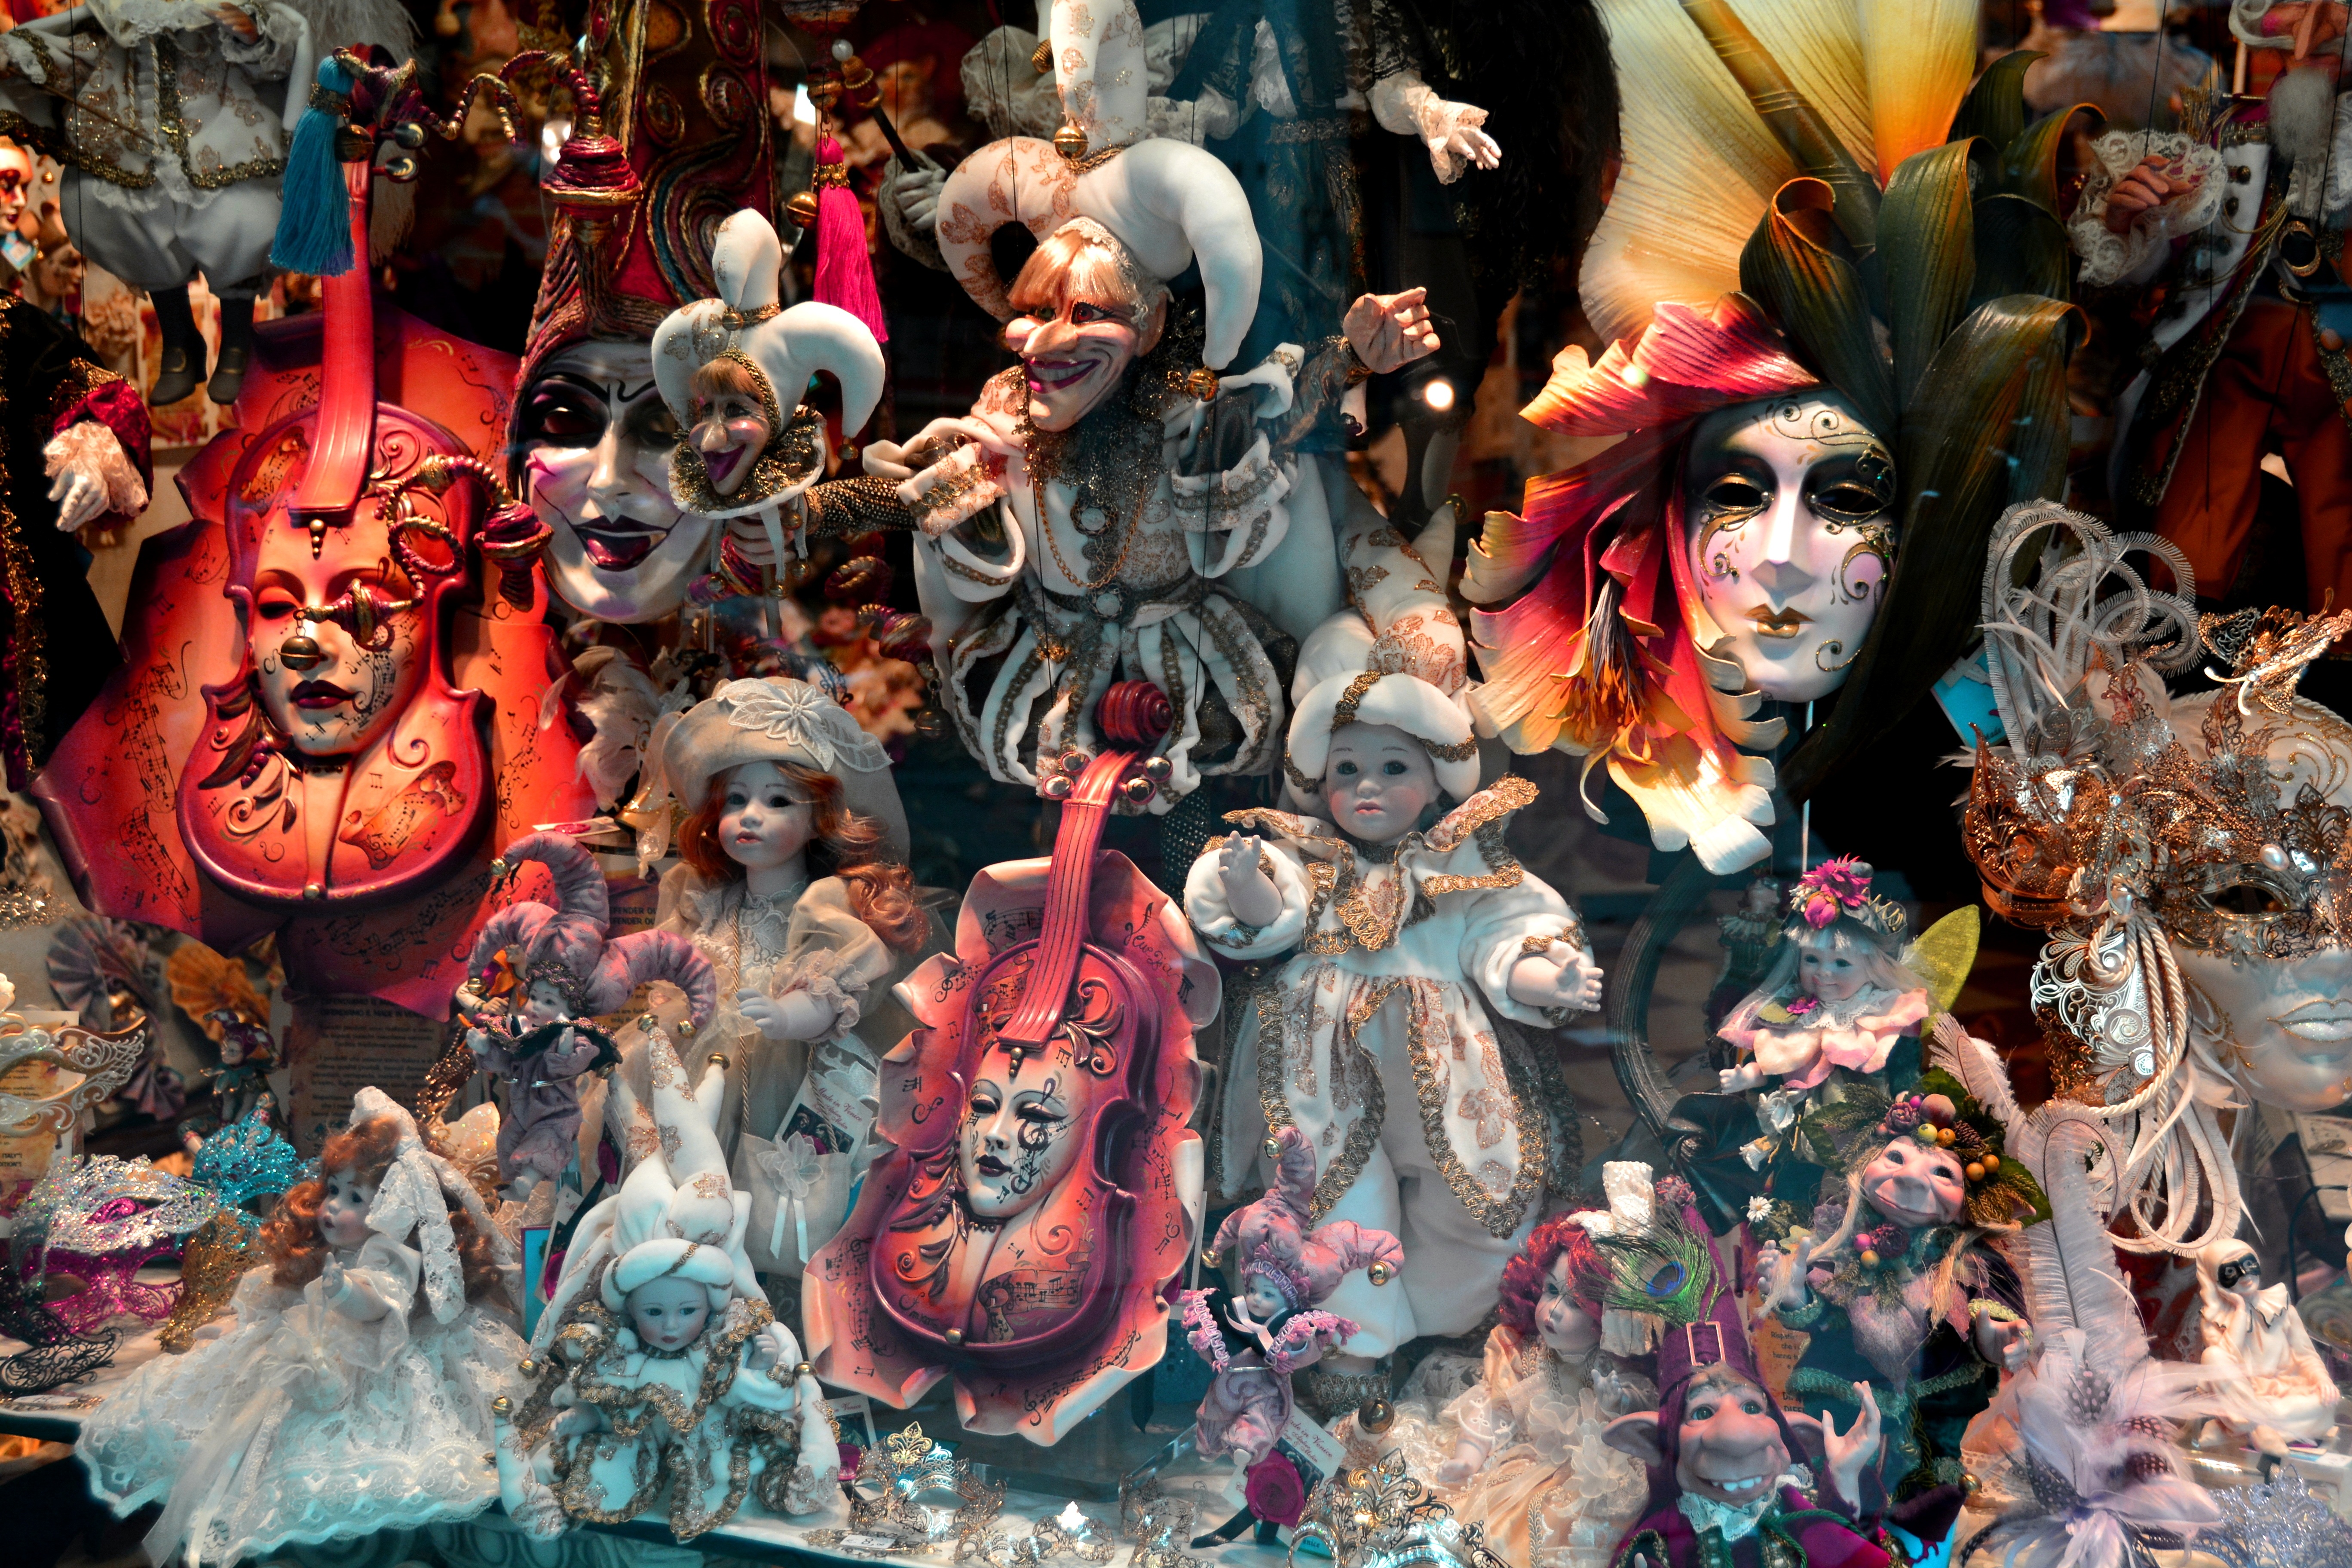 Venice, Masquerade, Carnival ceremic ornaments, dolls and masks by SHAWSHANK61